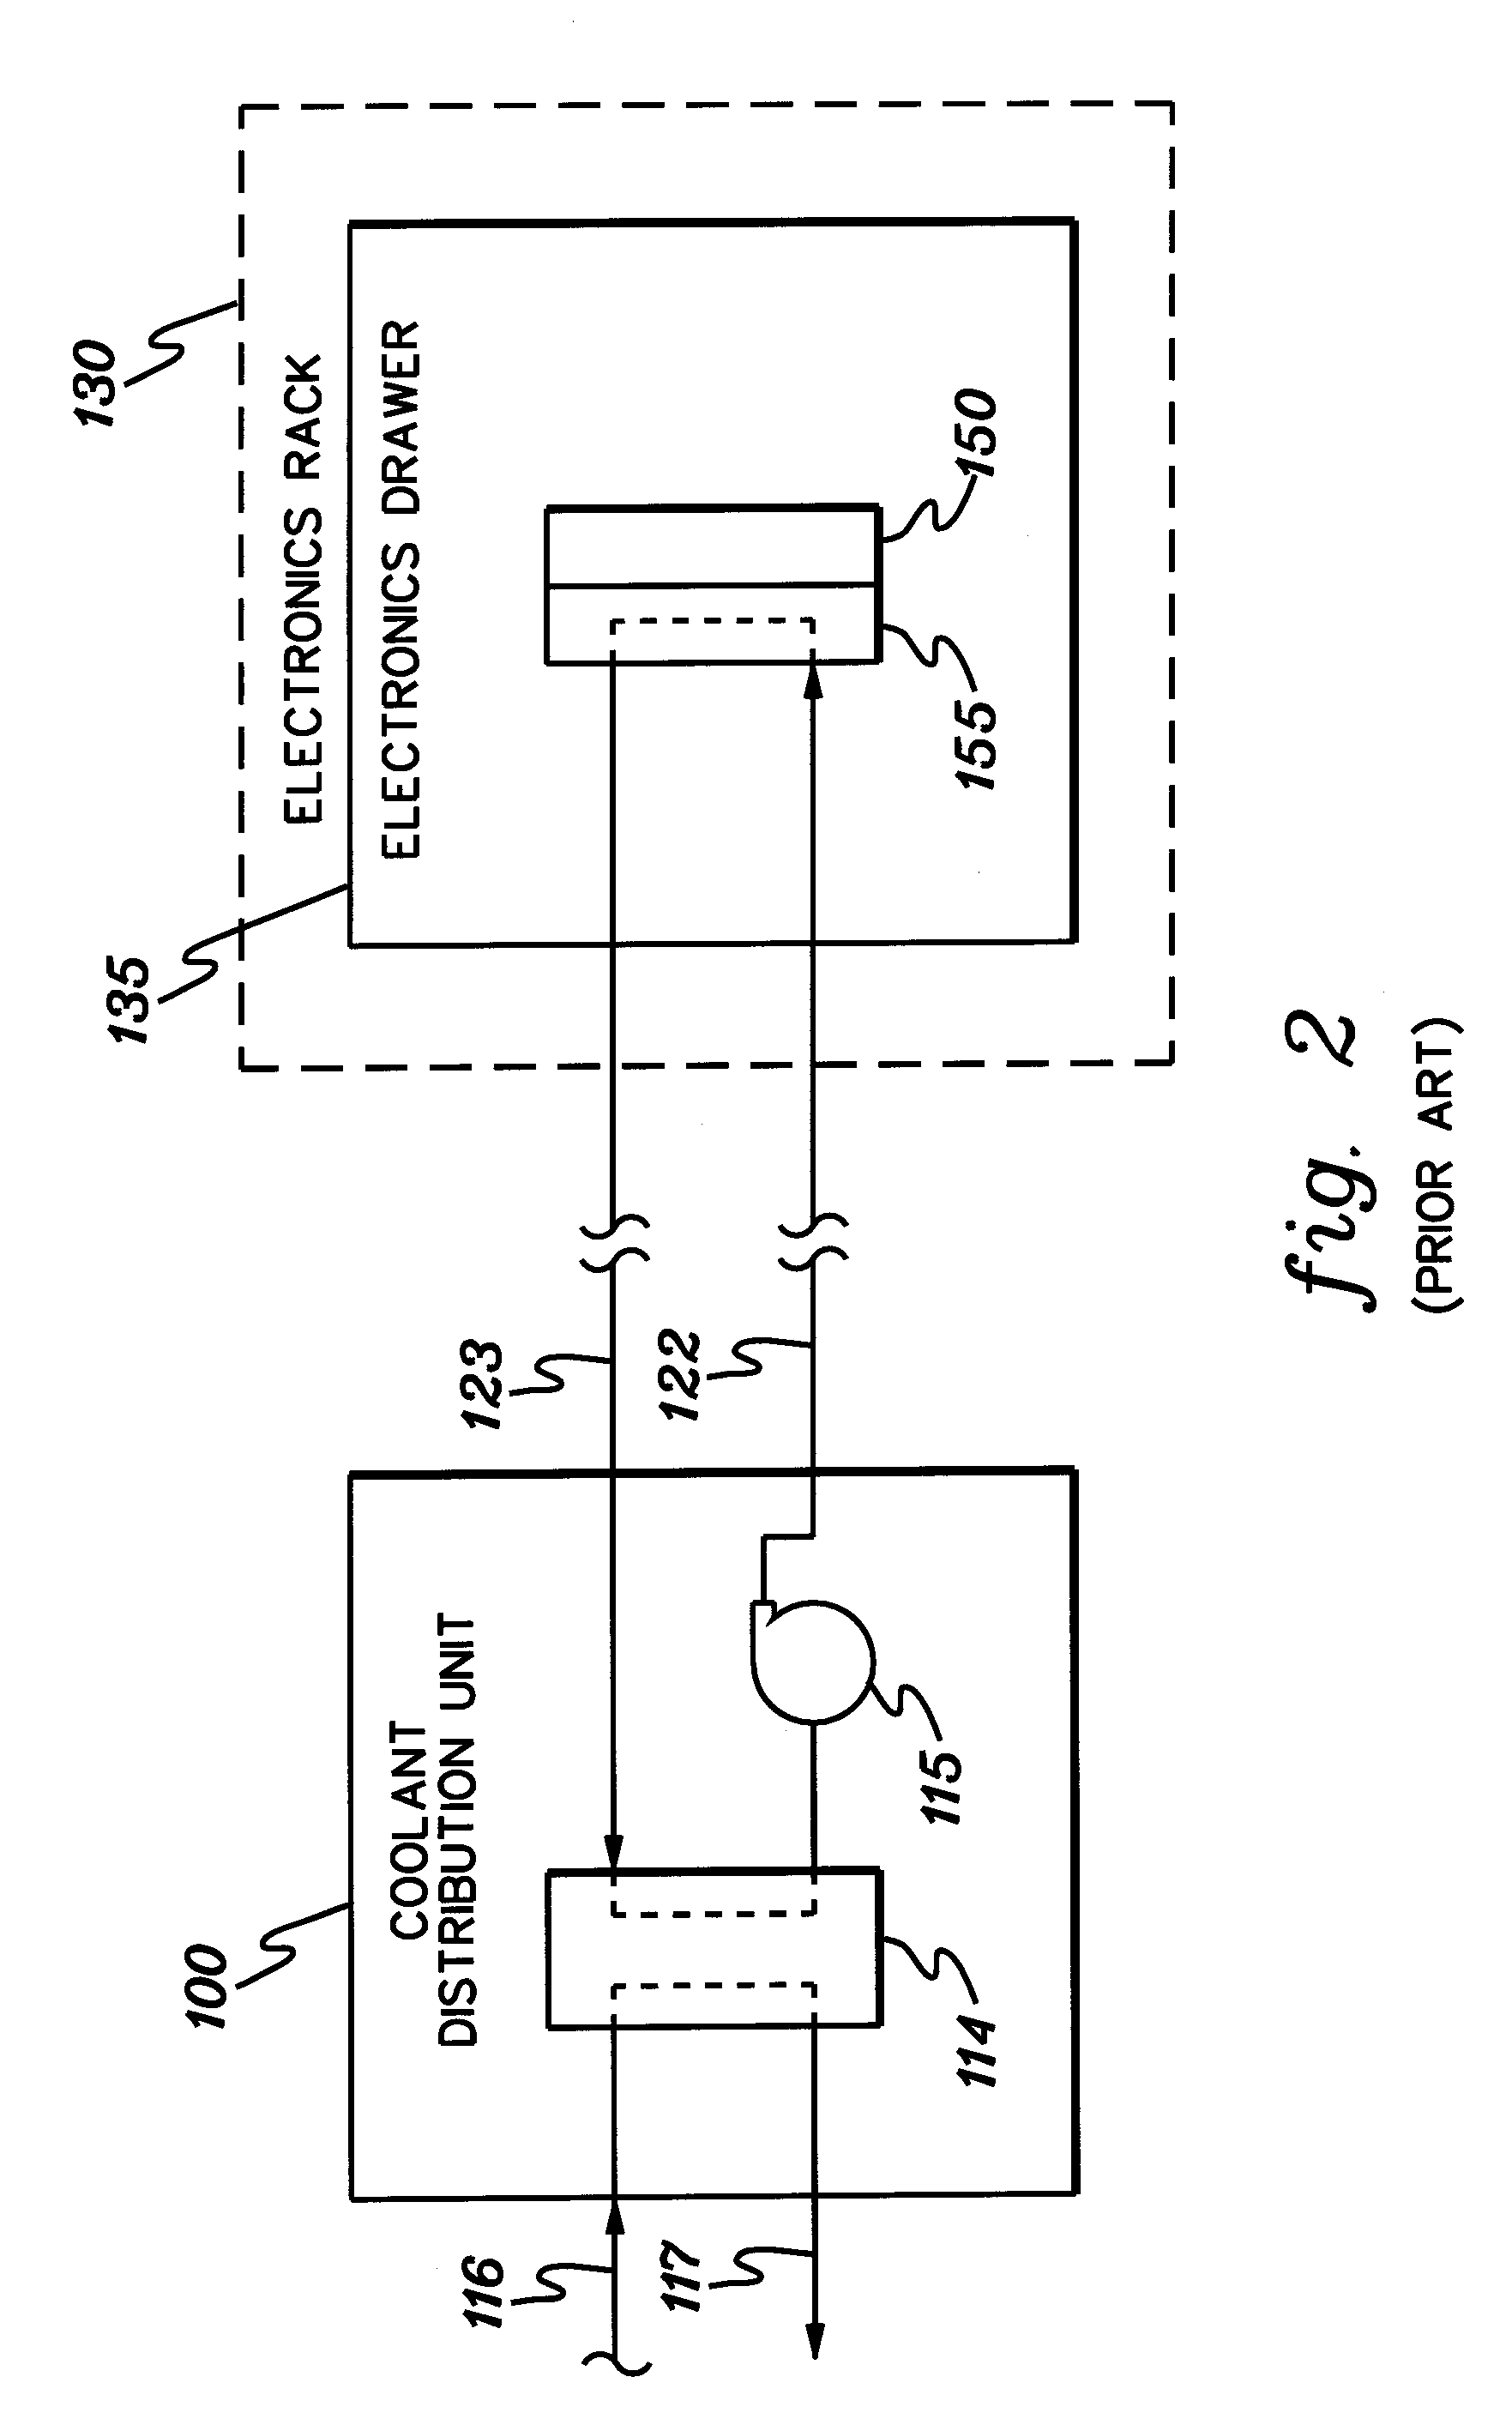 Cooling apparatus and method for an electronics module employing an integrated heat exchange assembly